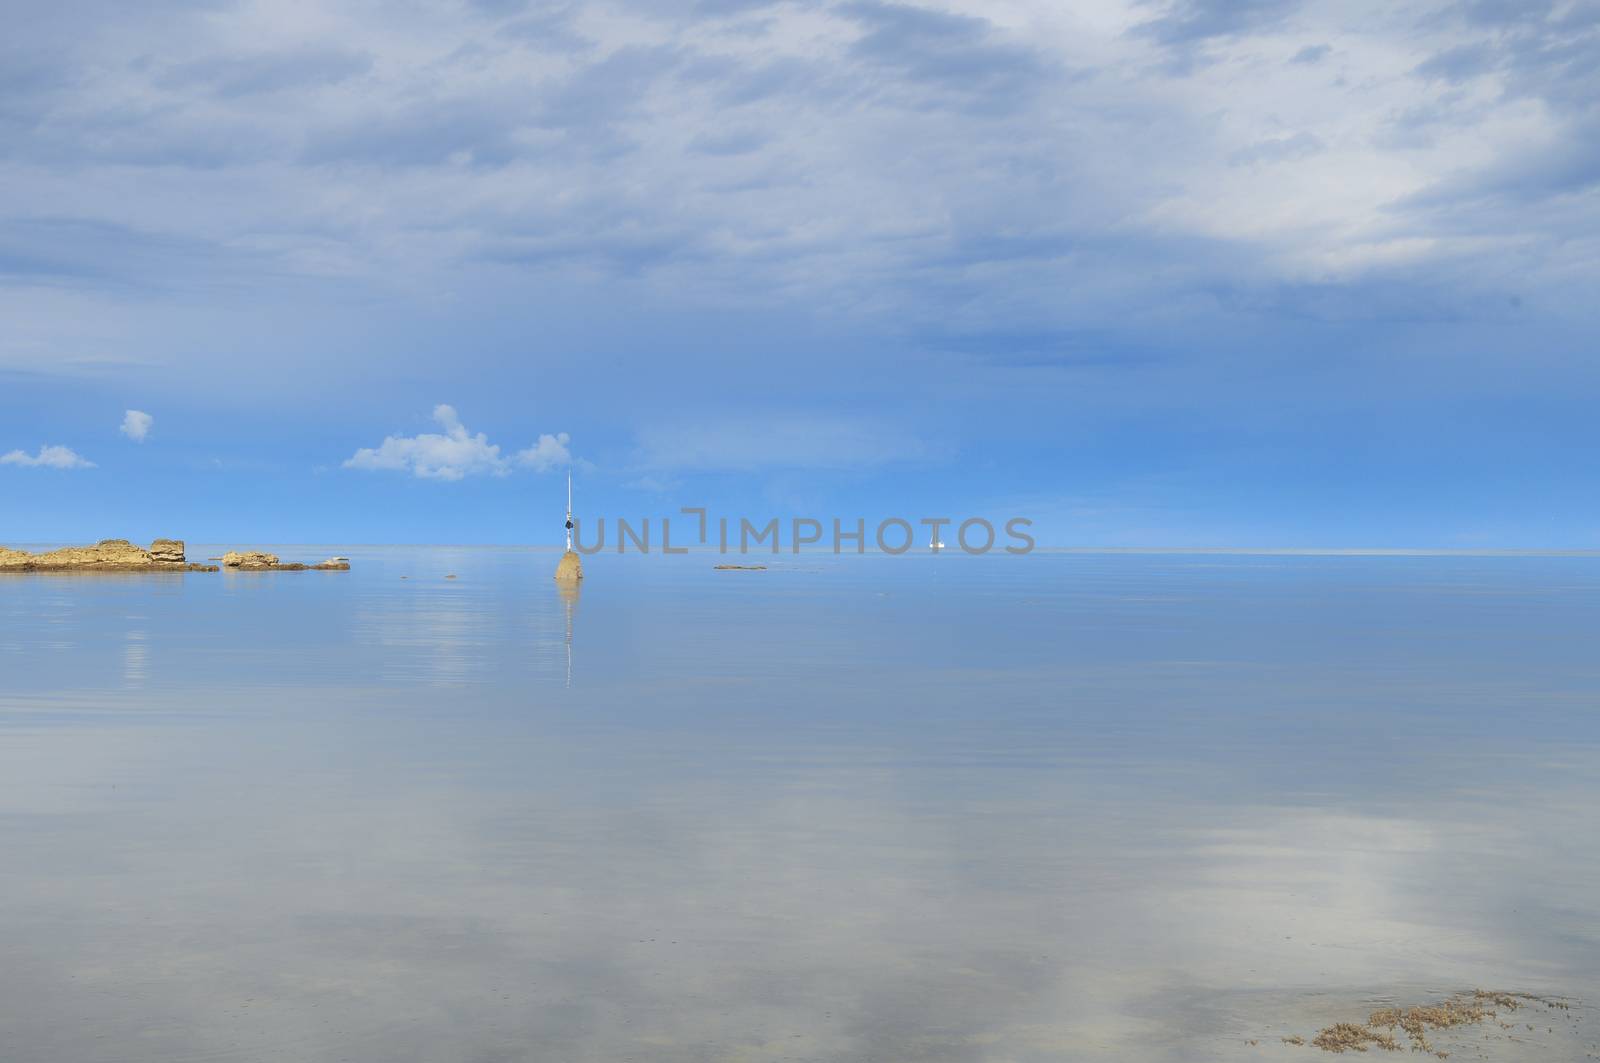 Morning at the seashore with misty water and diffuse light cased an almost surreal lighting situation. Blue skies, silky water and a sailboat complete the picture. Croatia, Istria